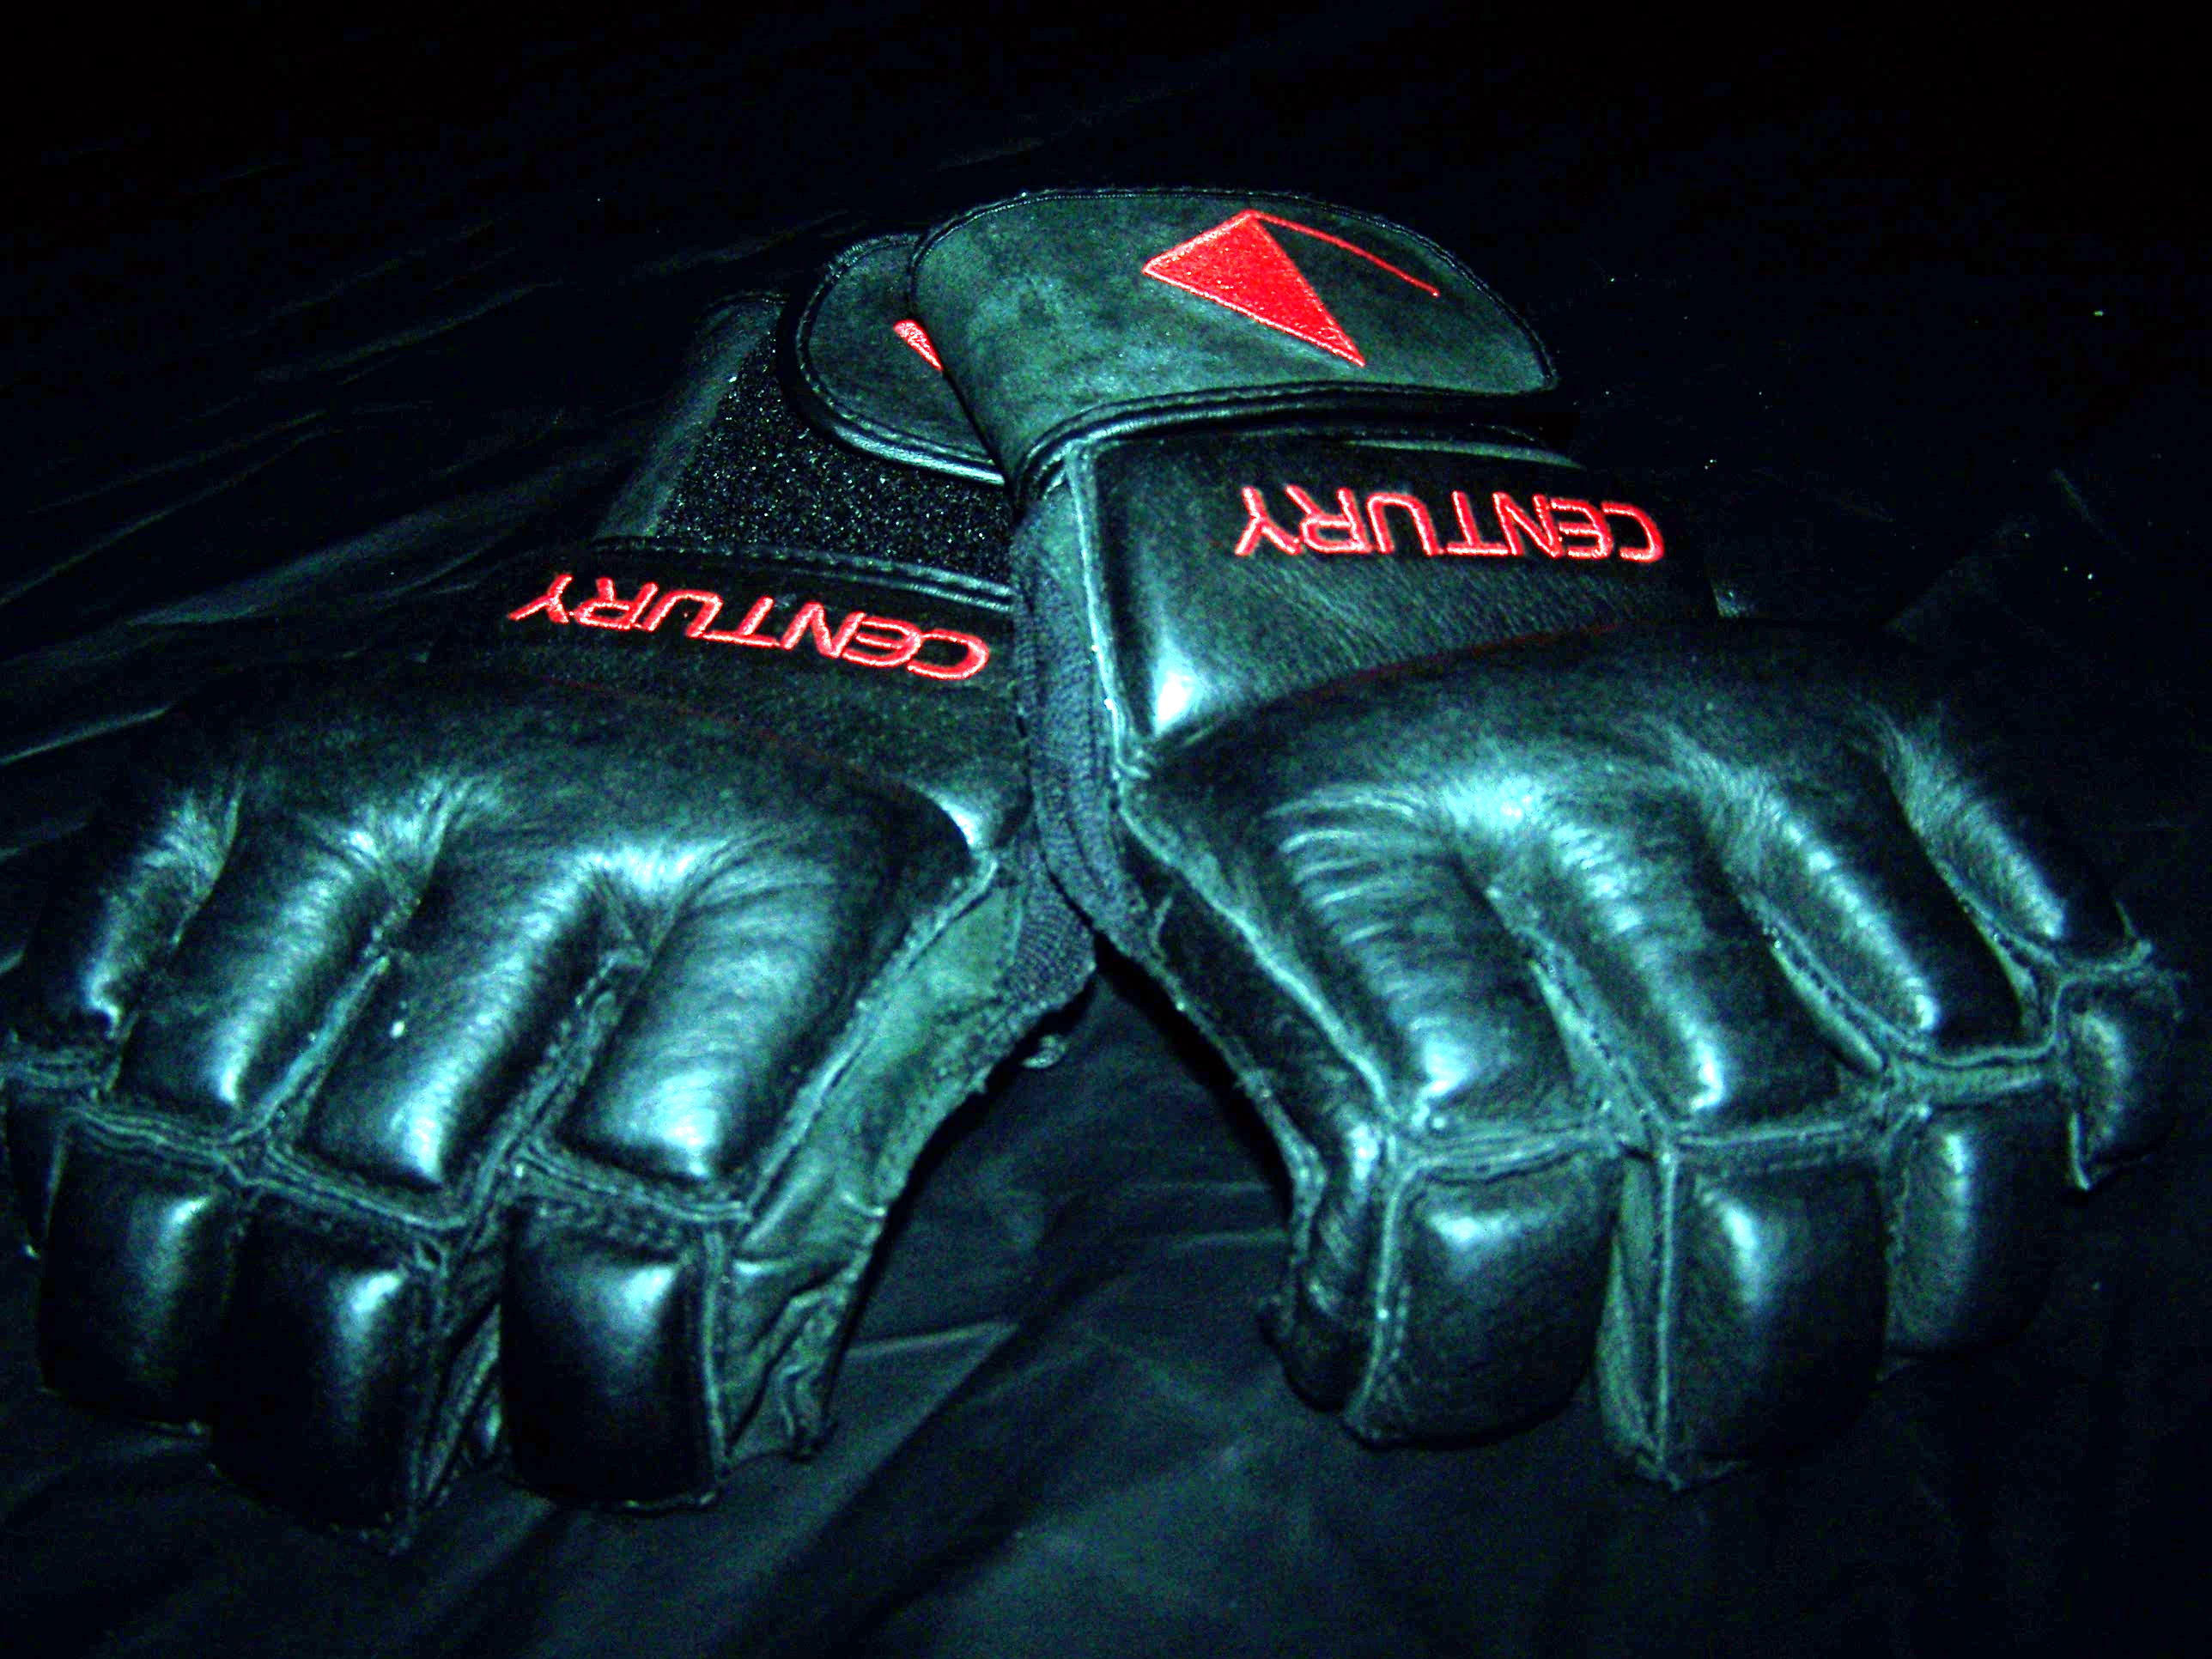 gloves good for body punching in a wild submission match.